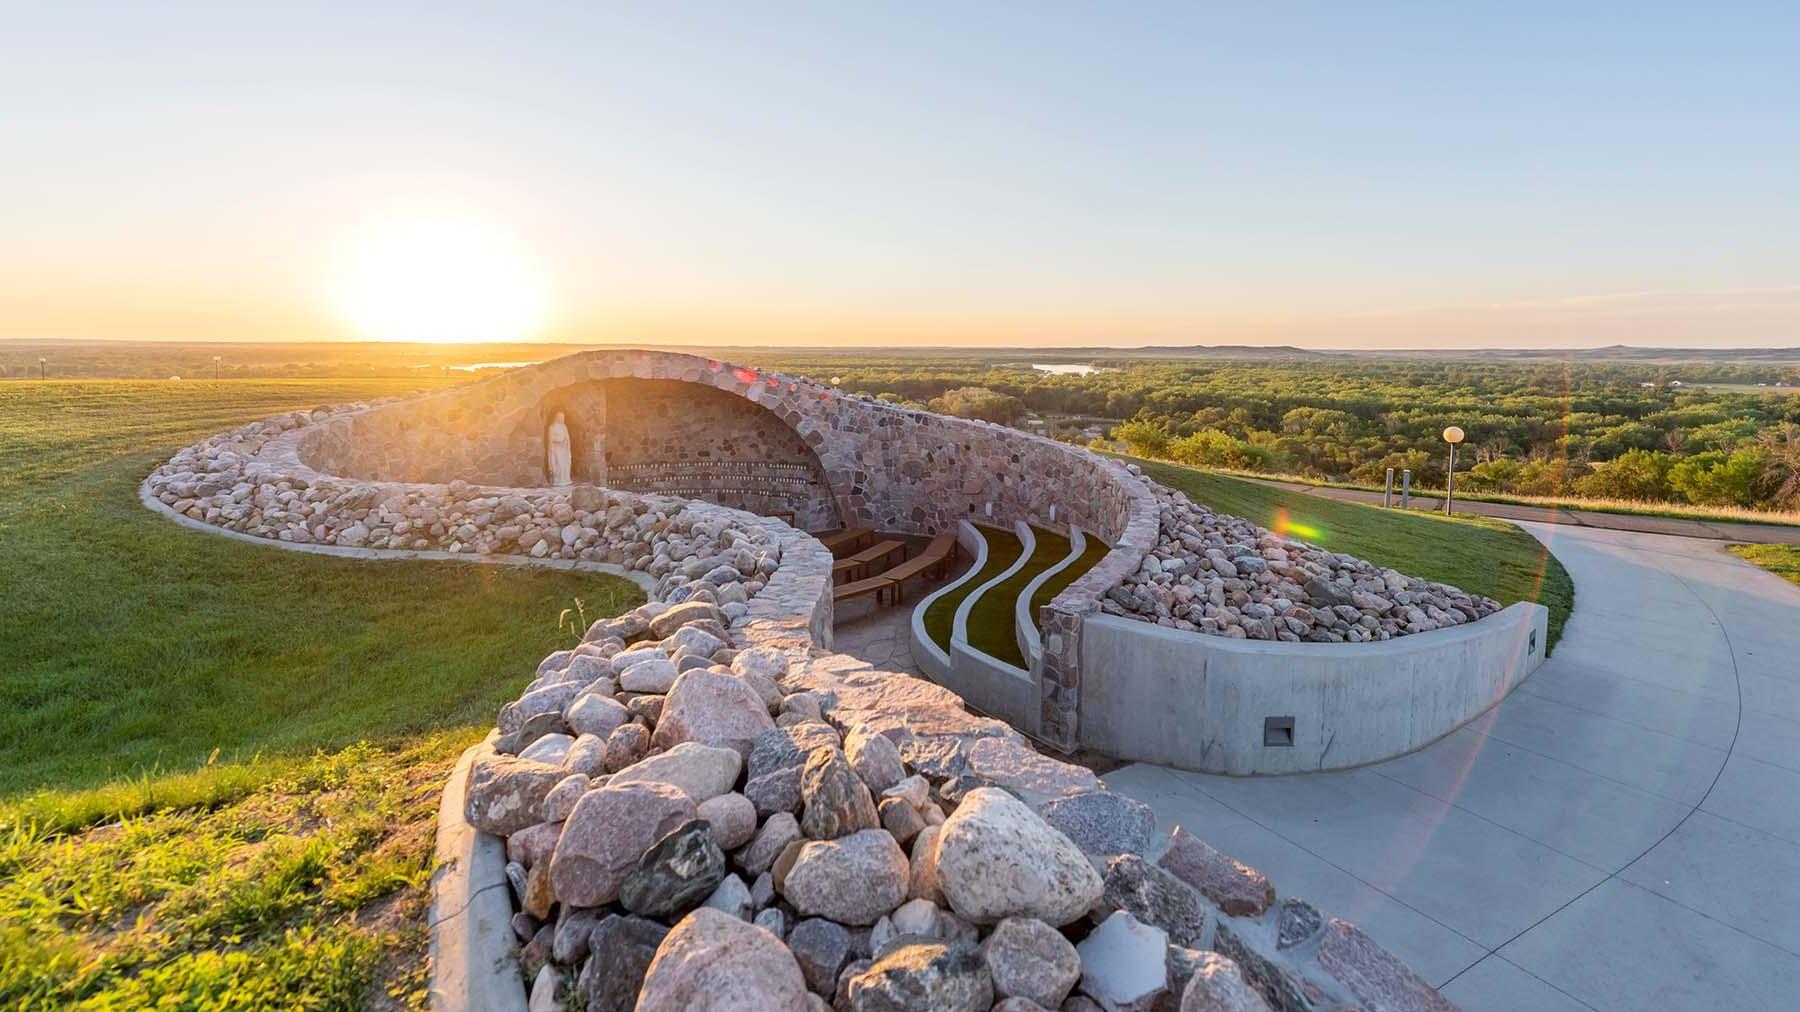 A view of the Grotto with the sun setting over the horizon and a view of Bismarck North Dakota and the Missouri River in the background.